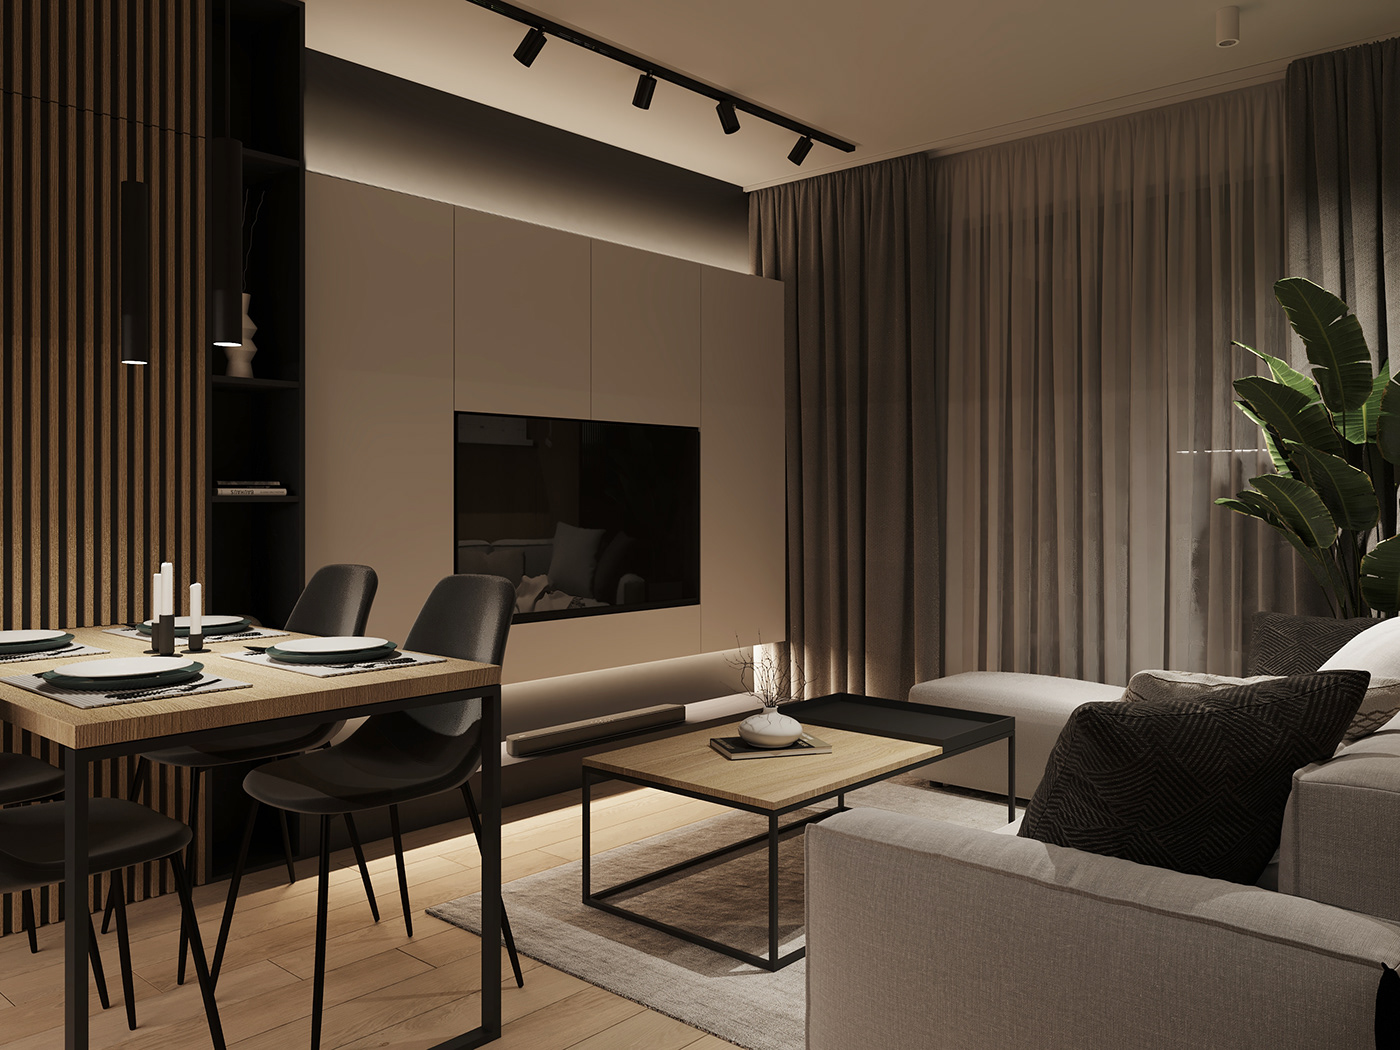 Soft light from various angles provides a sense of relaxation while also adding a light effect to the overall space.